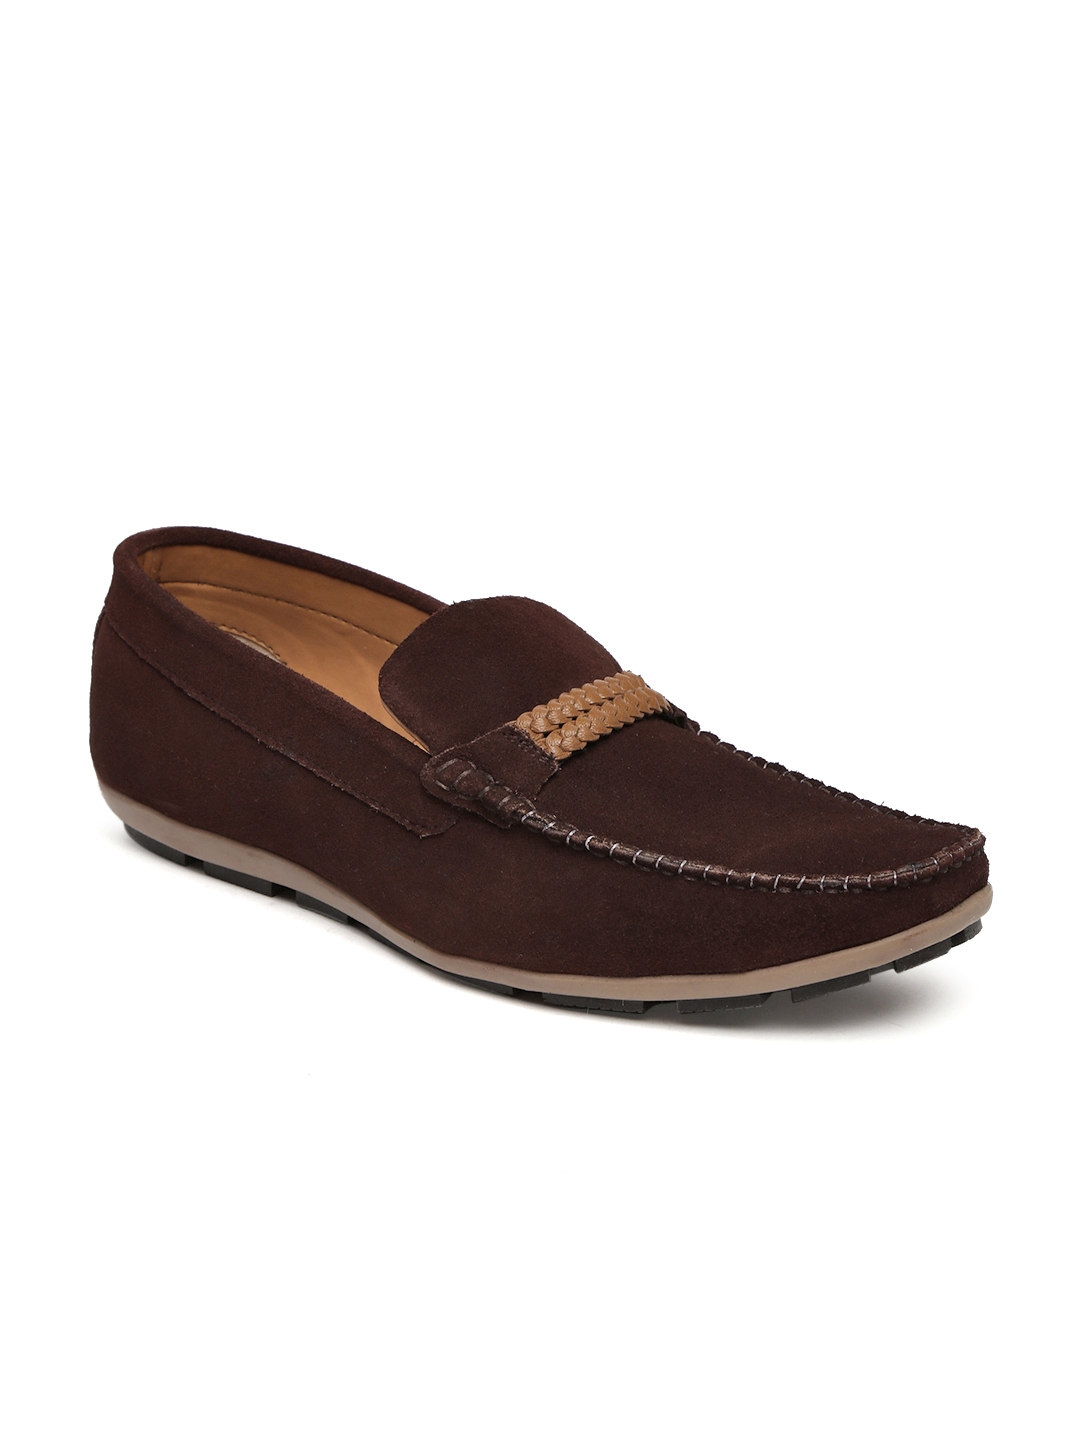 forca loafers